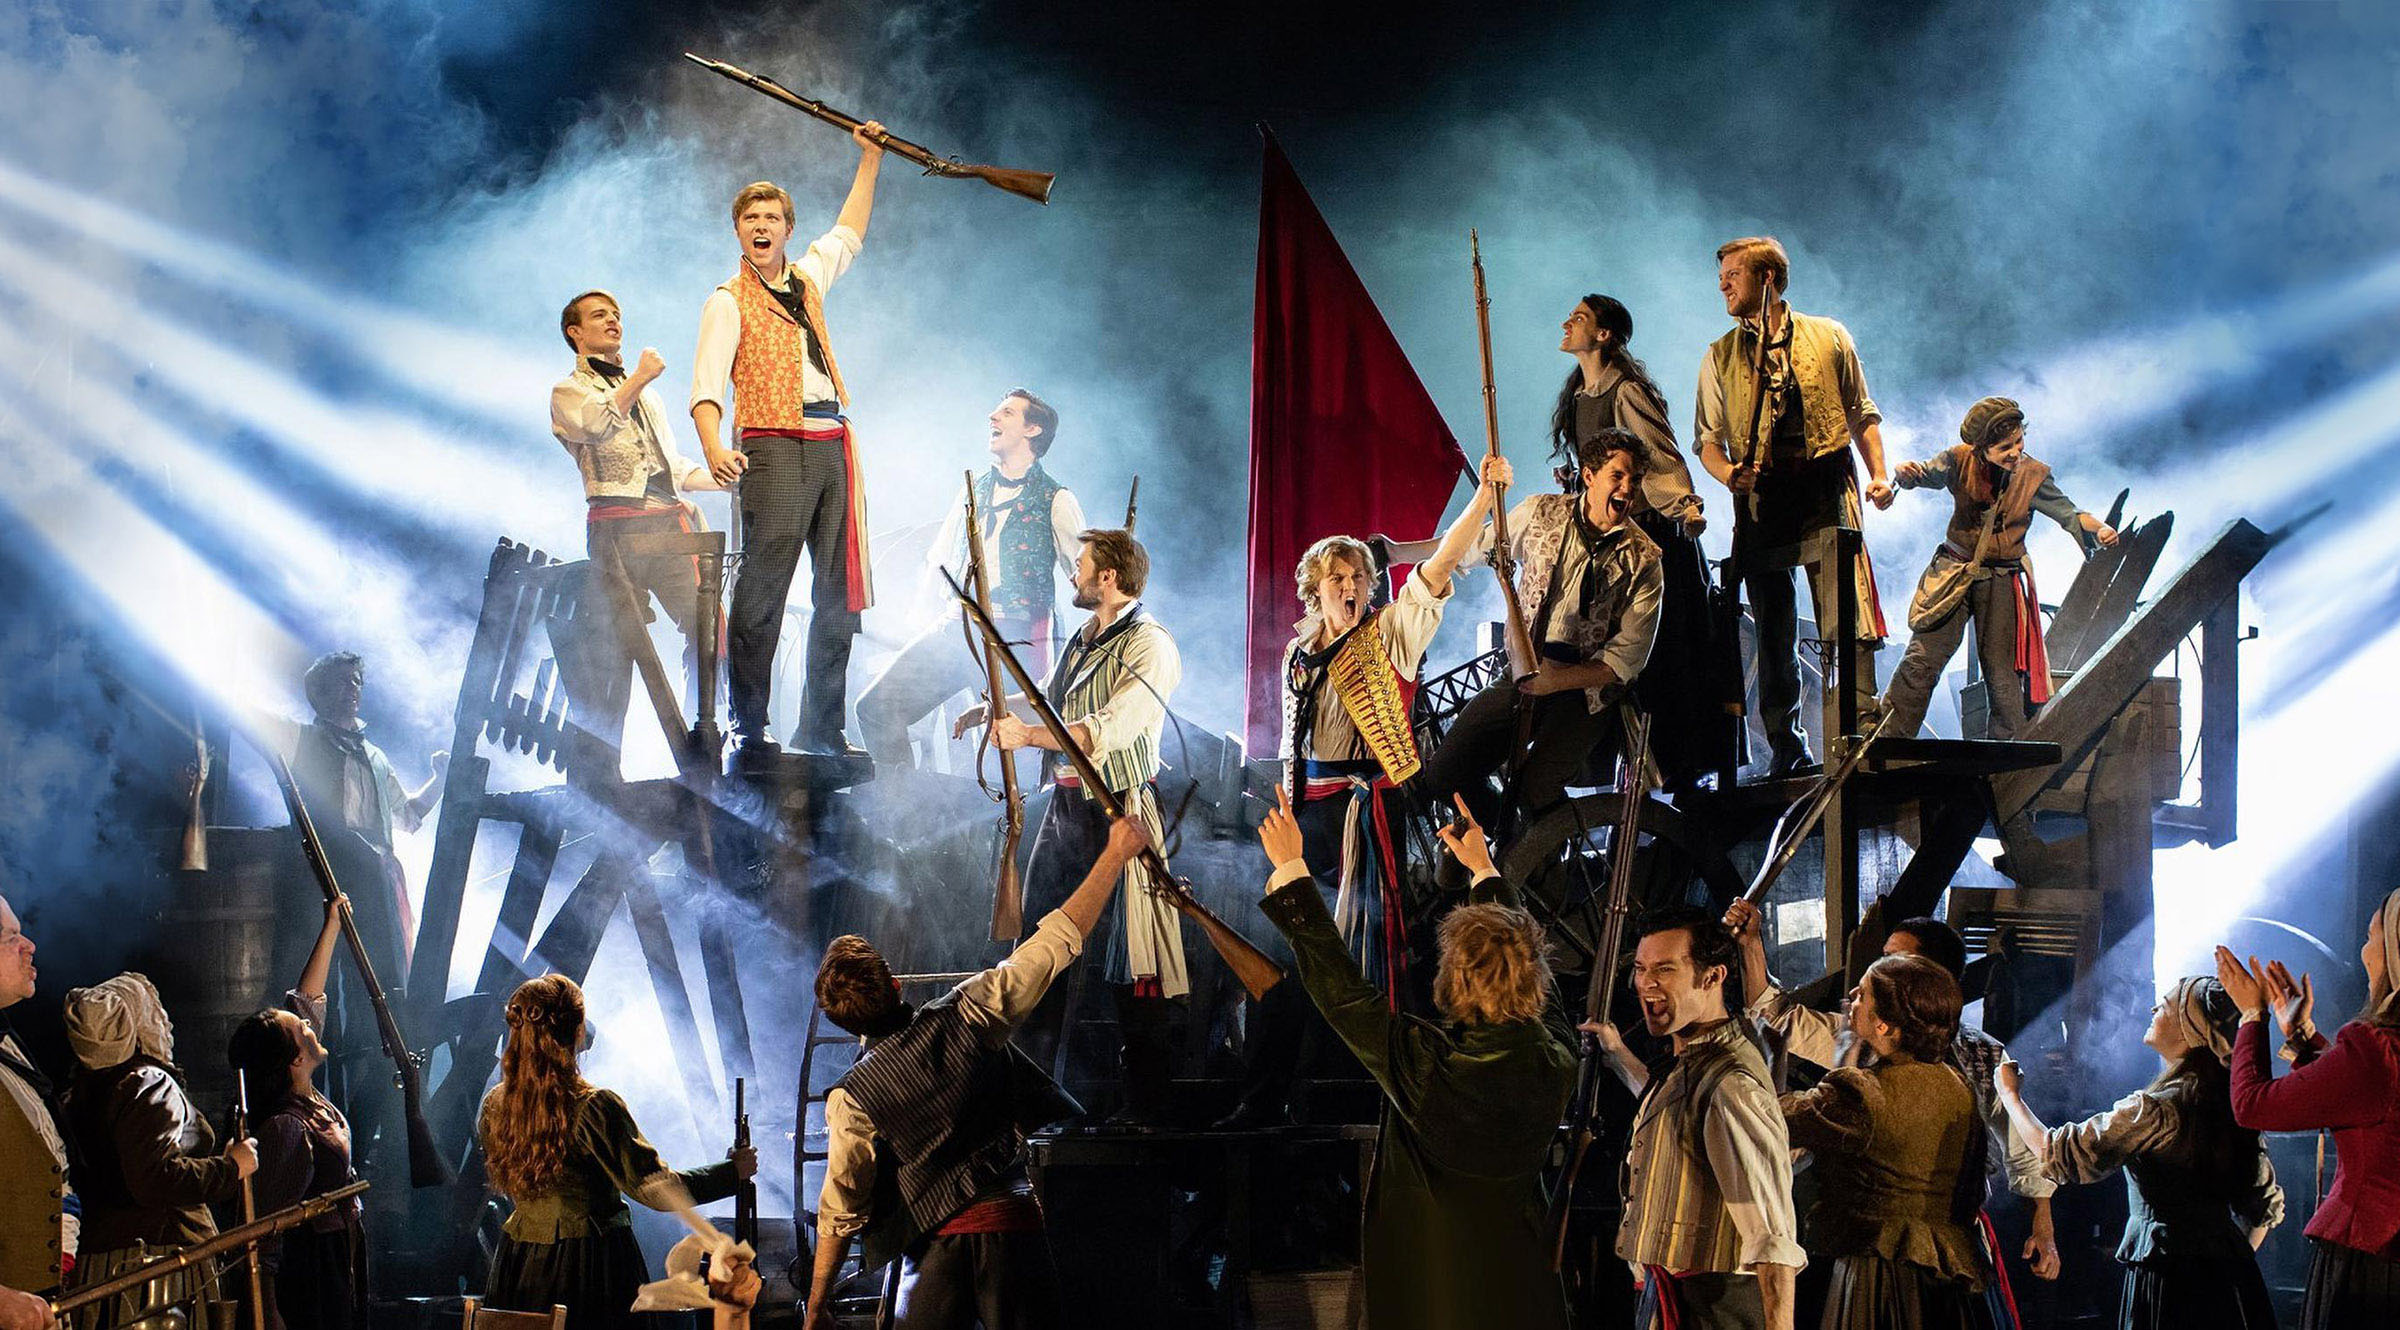 Production photography of the cast of Les Misérables by Helen Maybanks